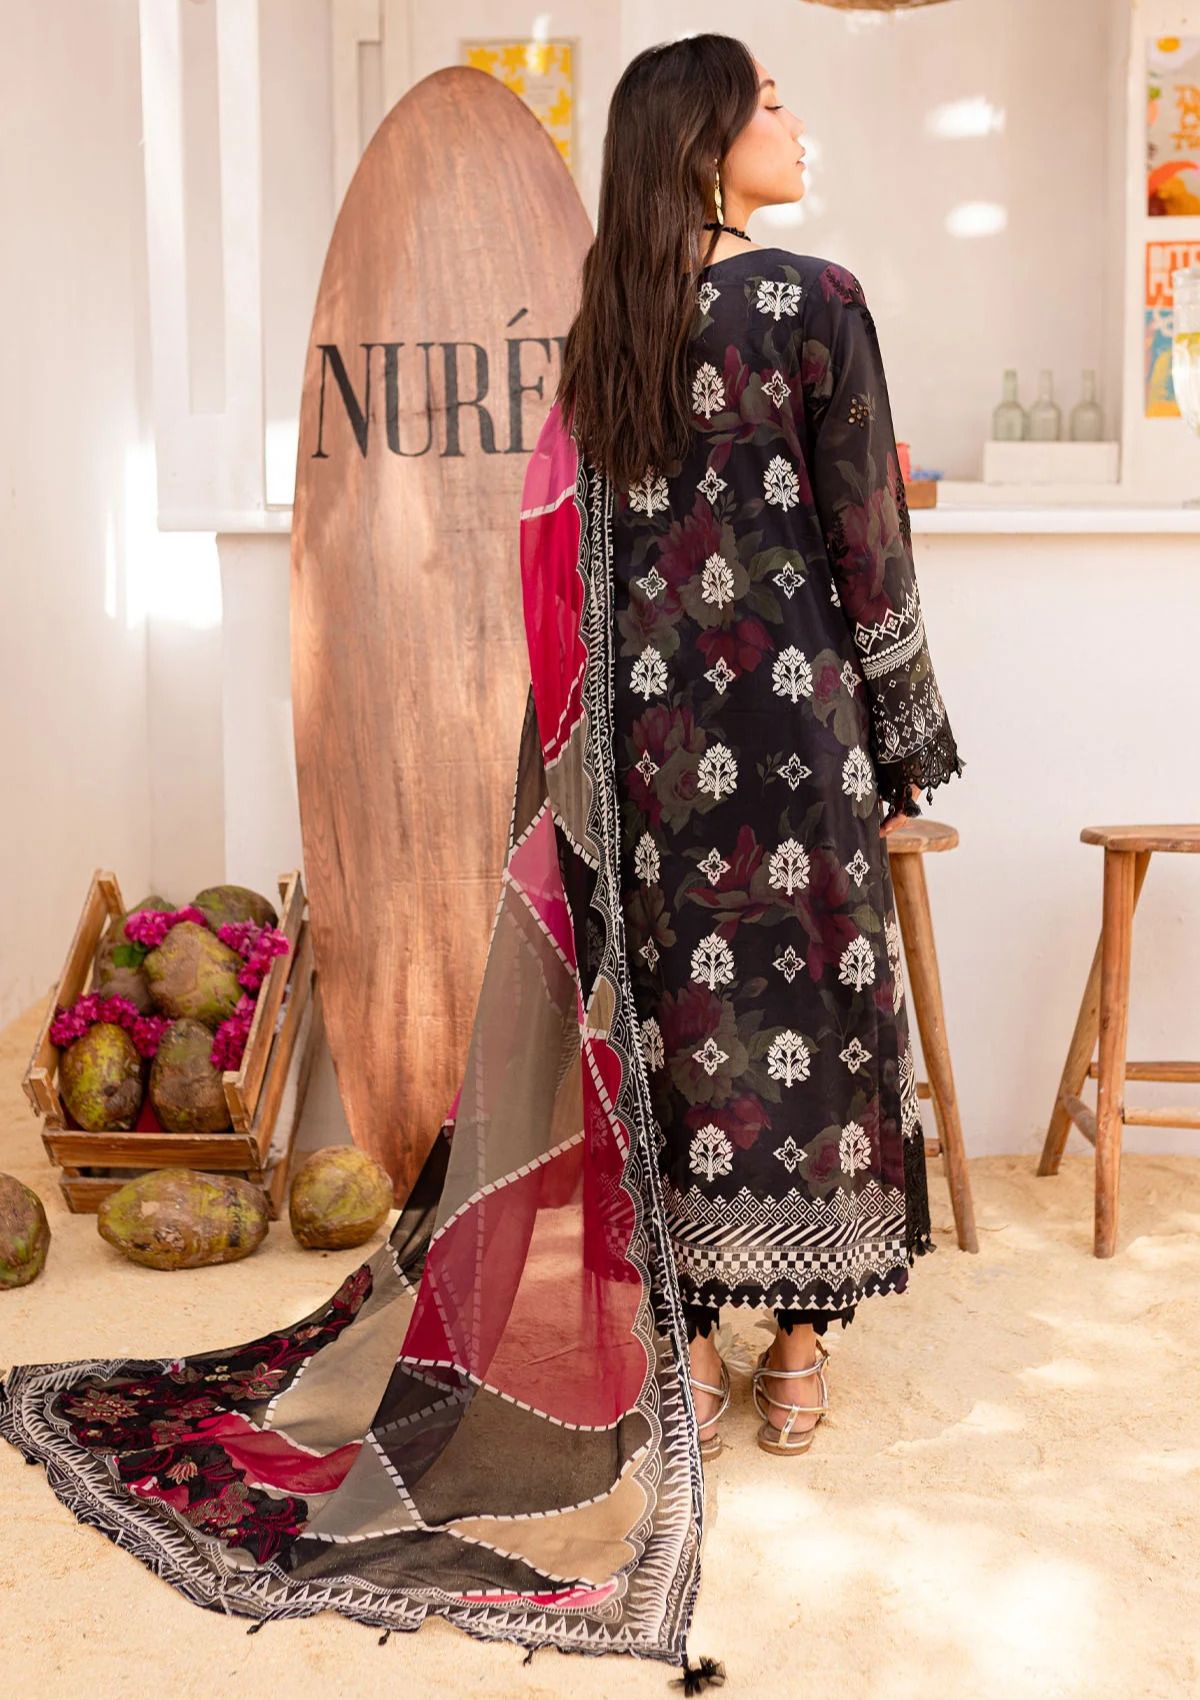 Lawn Collection - Nureh - Gardenia - Embroidered 24 - NS#133